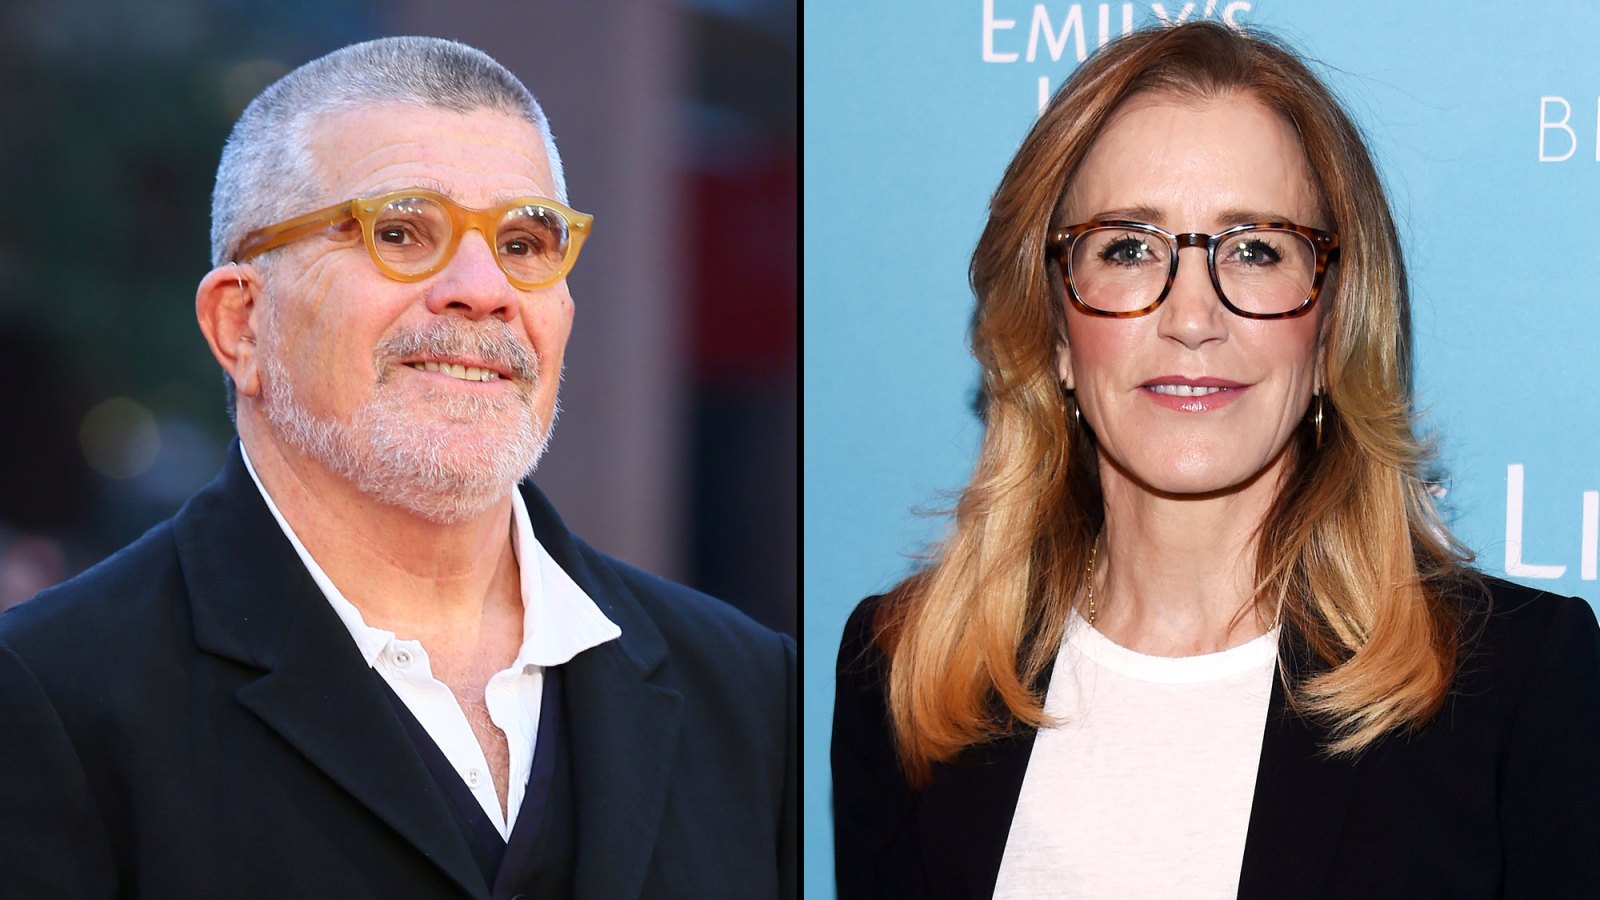 Playwright David Mamet Defends Friend Felicity Huffman Amid College Admissions Scandal: 'Not Guilty, But Don't Do It Again'